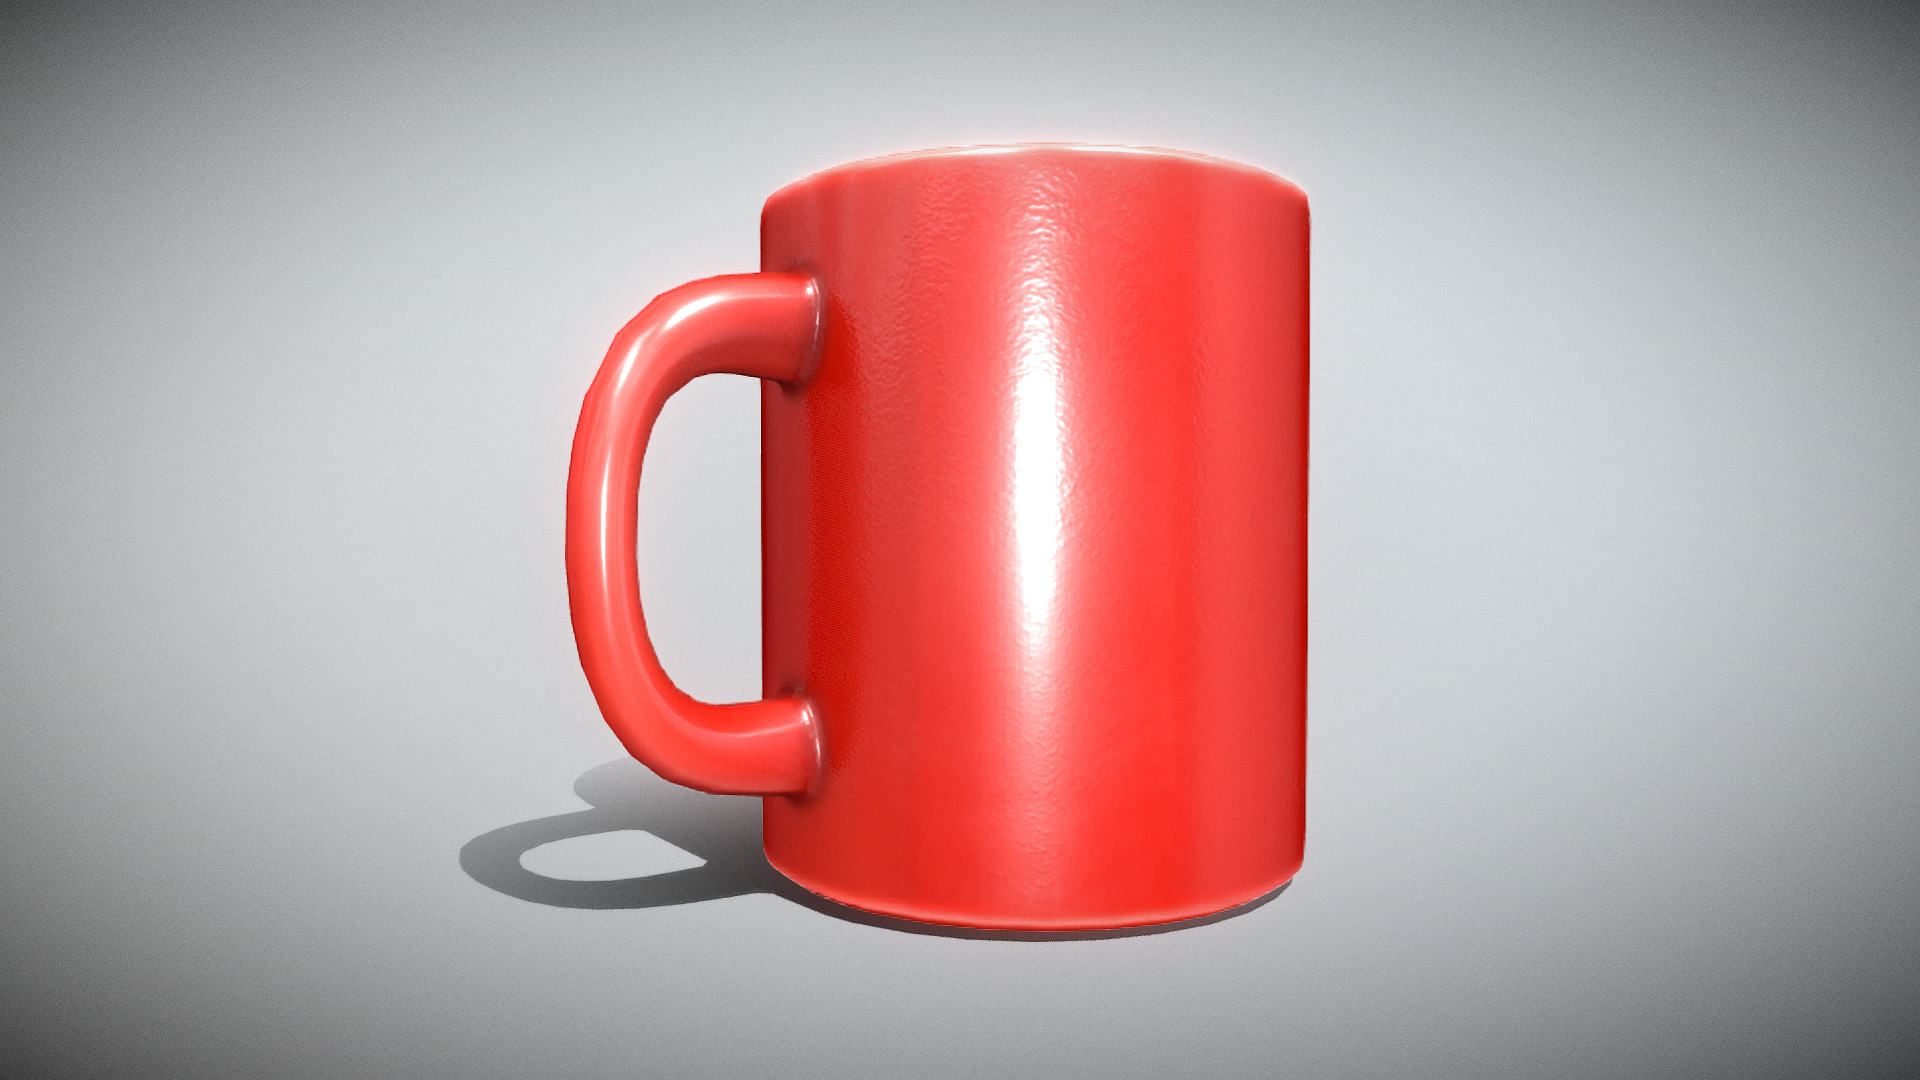 3D model Coffee Cup Red Version - This is a 3D model of the Coffee Cup Red Version. The 3D model is about a red mug on a white surface.